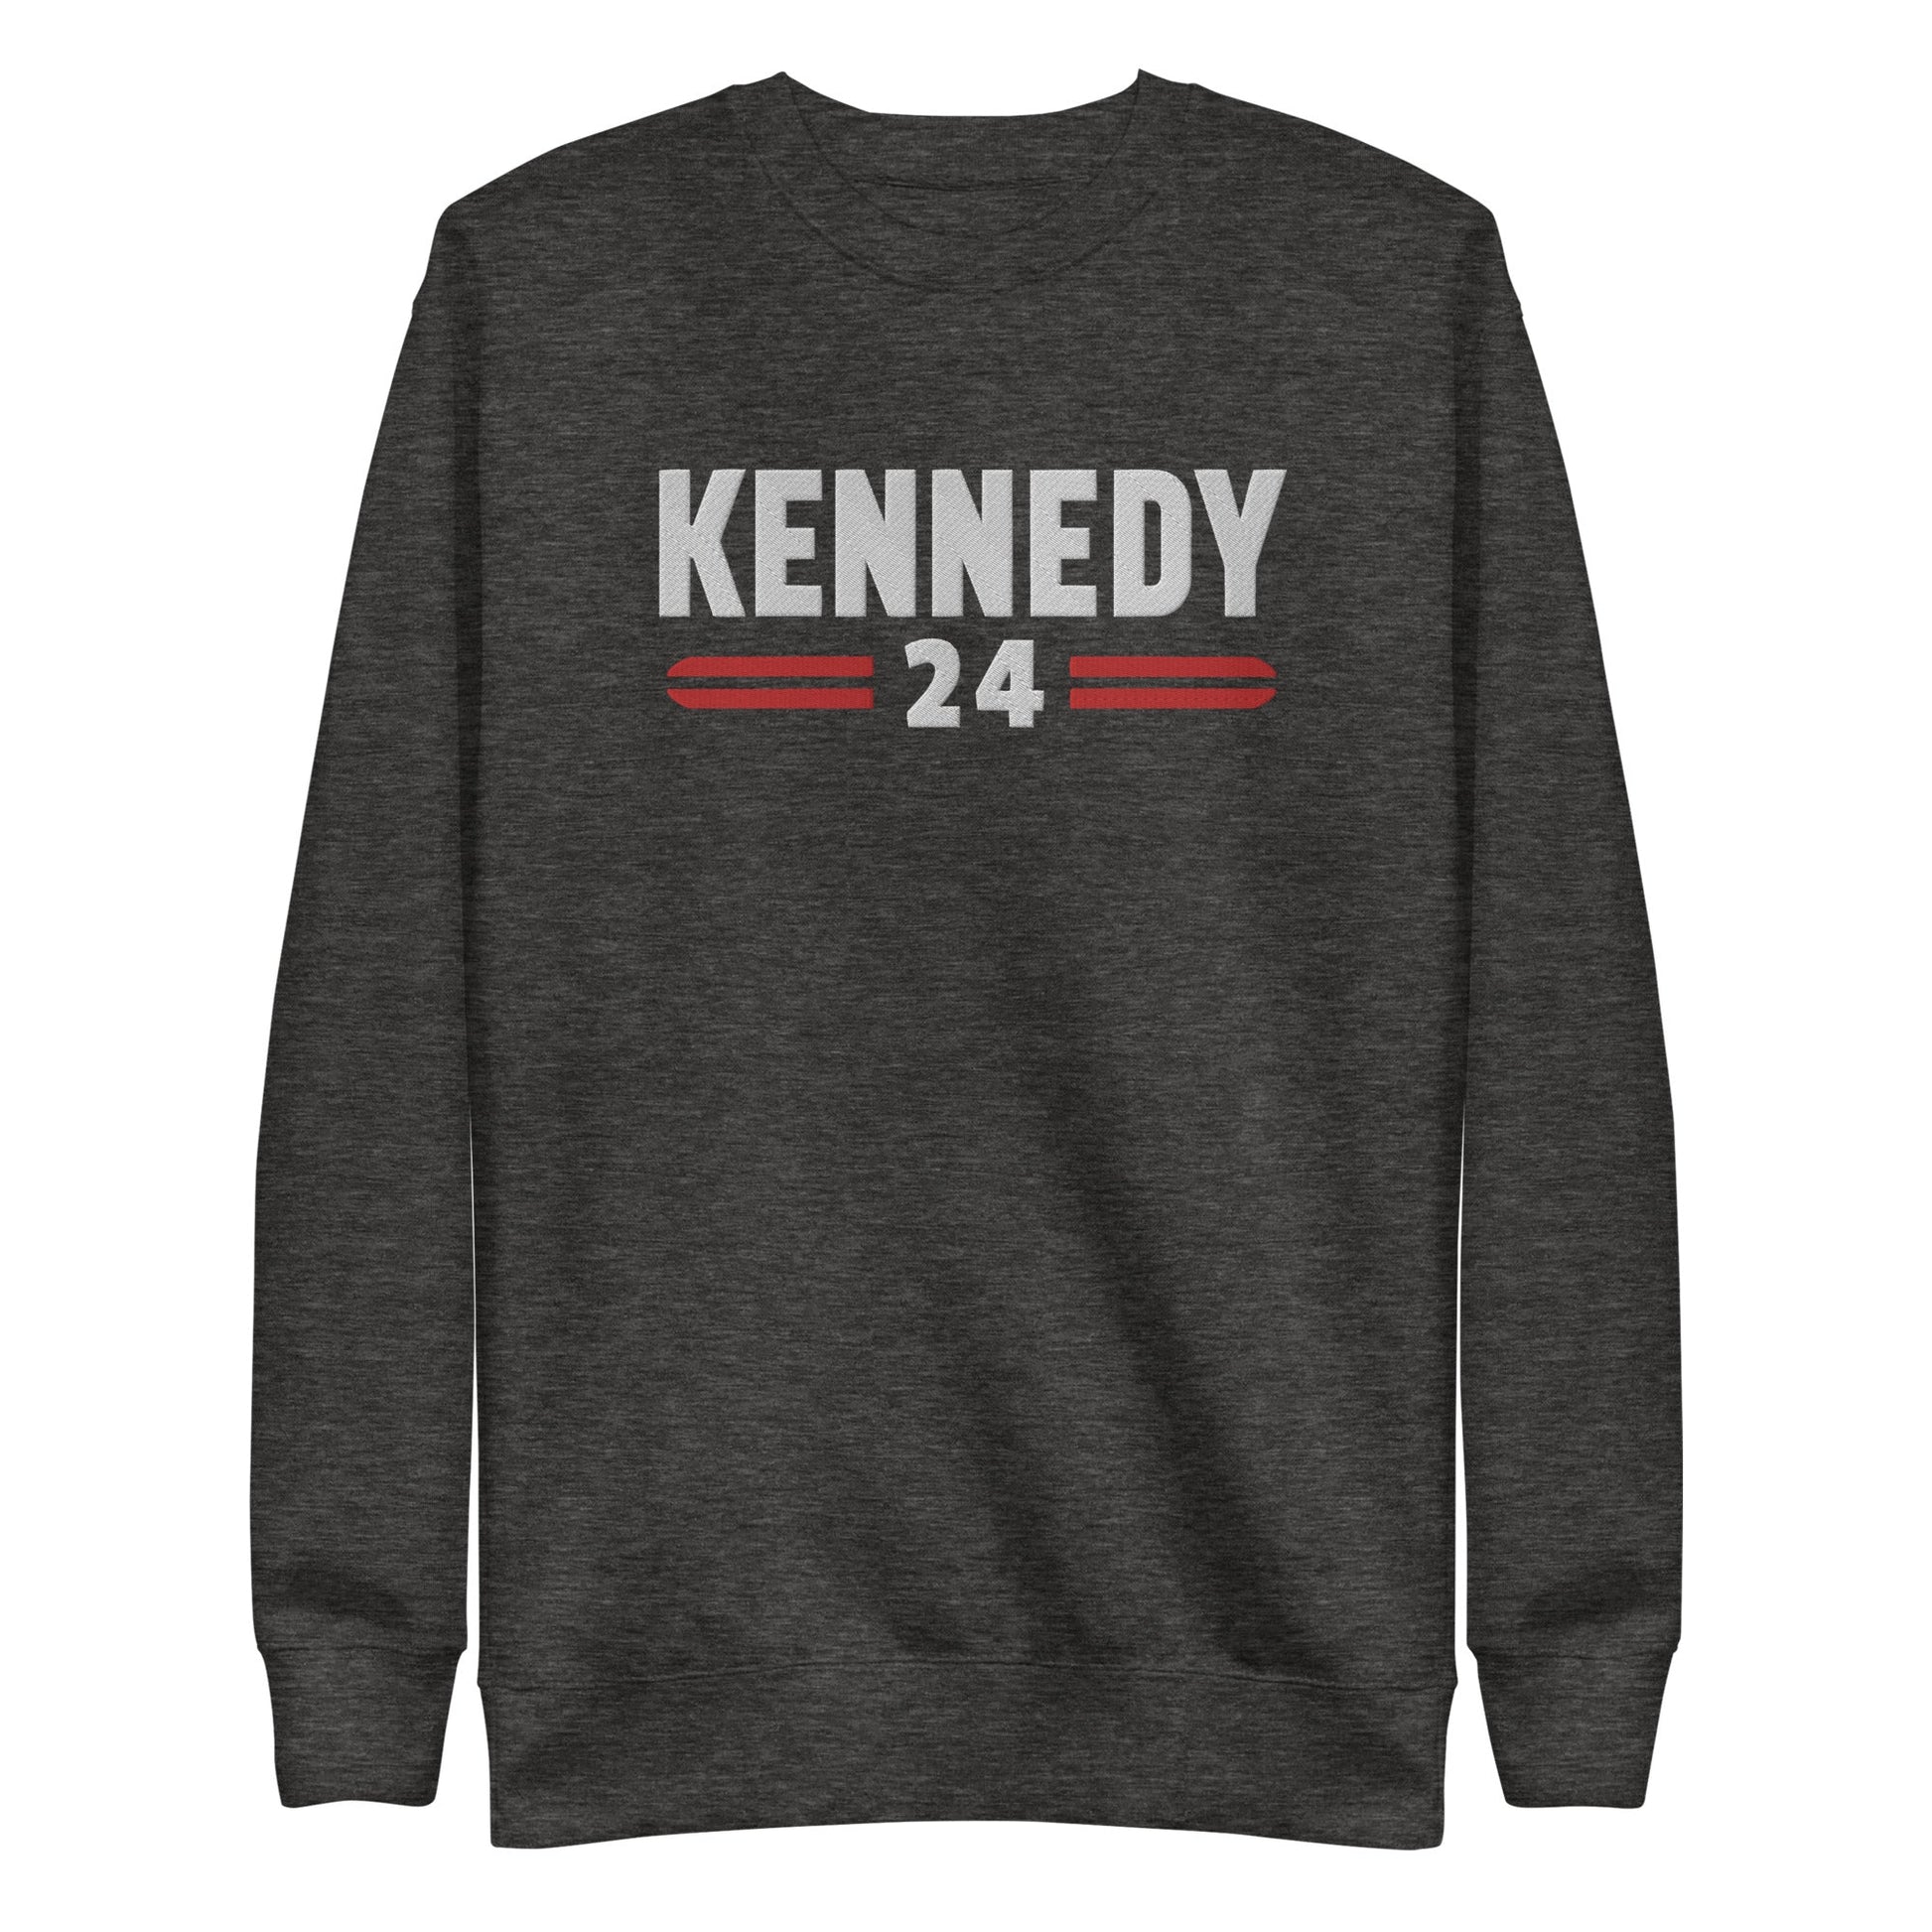 Kennedy Classic Embroidered Unisex Premium Sweatshirt - TEAM KENNEDY. All rights reserved